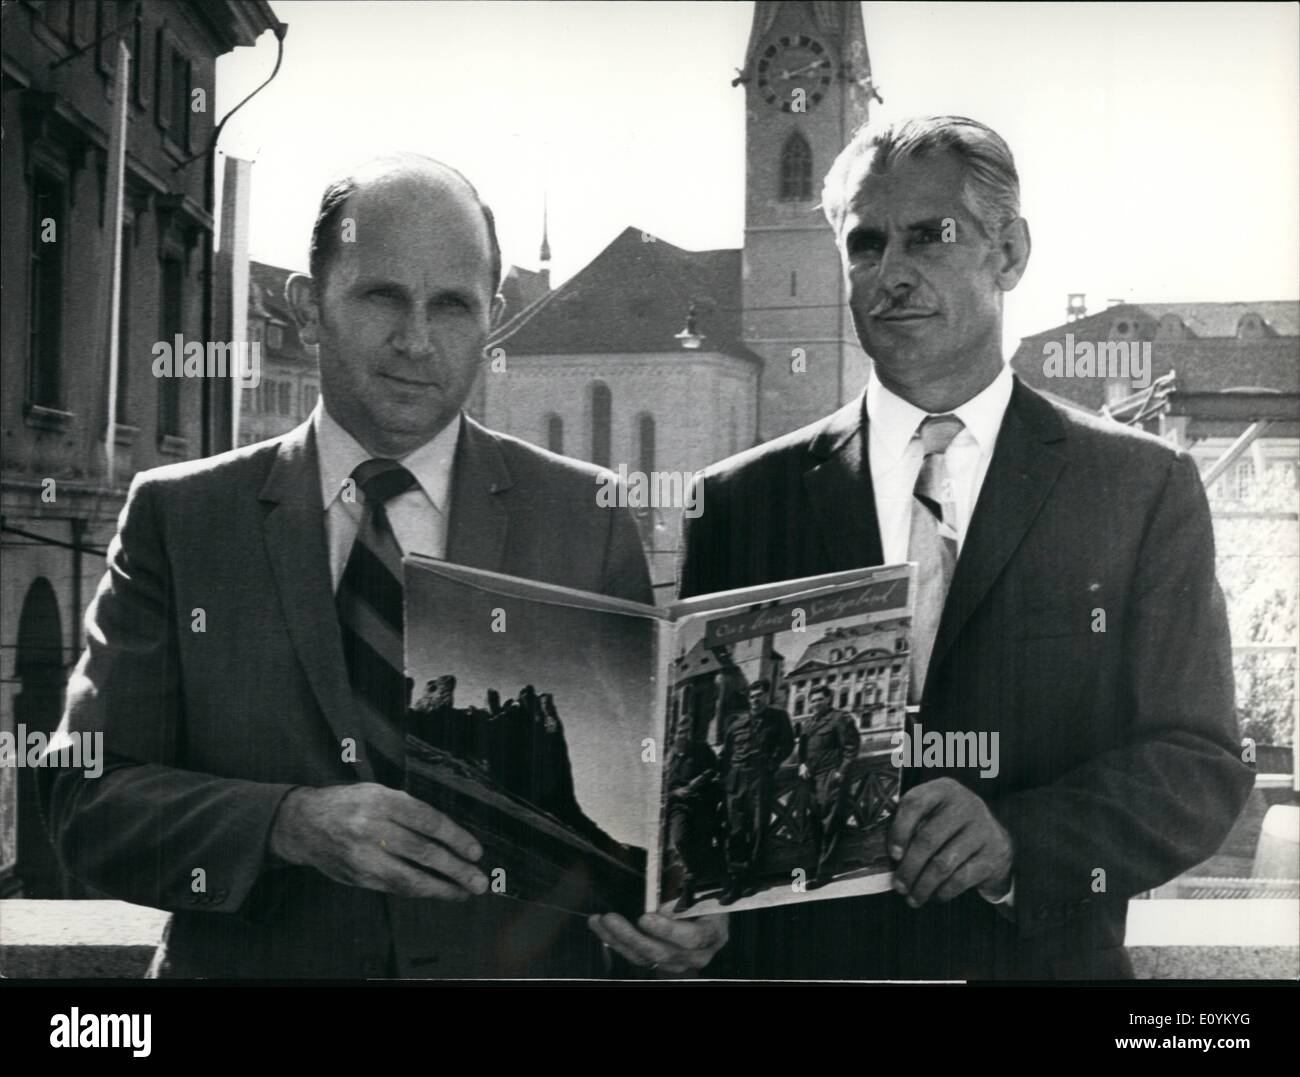 Sep. 09, 1970 - 4 memory-trip for GI's 25 years ago 450,000 US-Army-Leaves stayed in Switzerland. For this ''silver anniversary'' the Swiss Tourist Center explored two of the three US-soldiers, who figured on the front page of a memorial-book ''Leave in Switzerland'', and invited them to a memory-trip in Switzerland. On this way the GI's can show to her families the places they visited 25 years ago after the war. Photo Shows:The two ex-GIs Jesse H. Ellsworth (left) and Steve Marcinek (r) with the memorial-book. Stock Photo